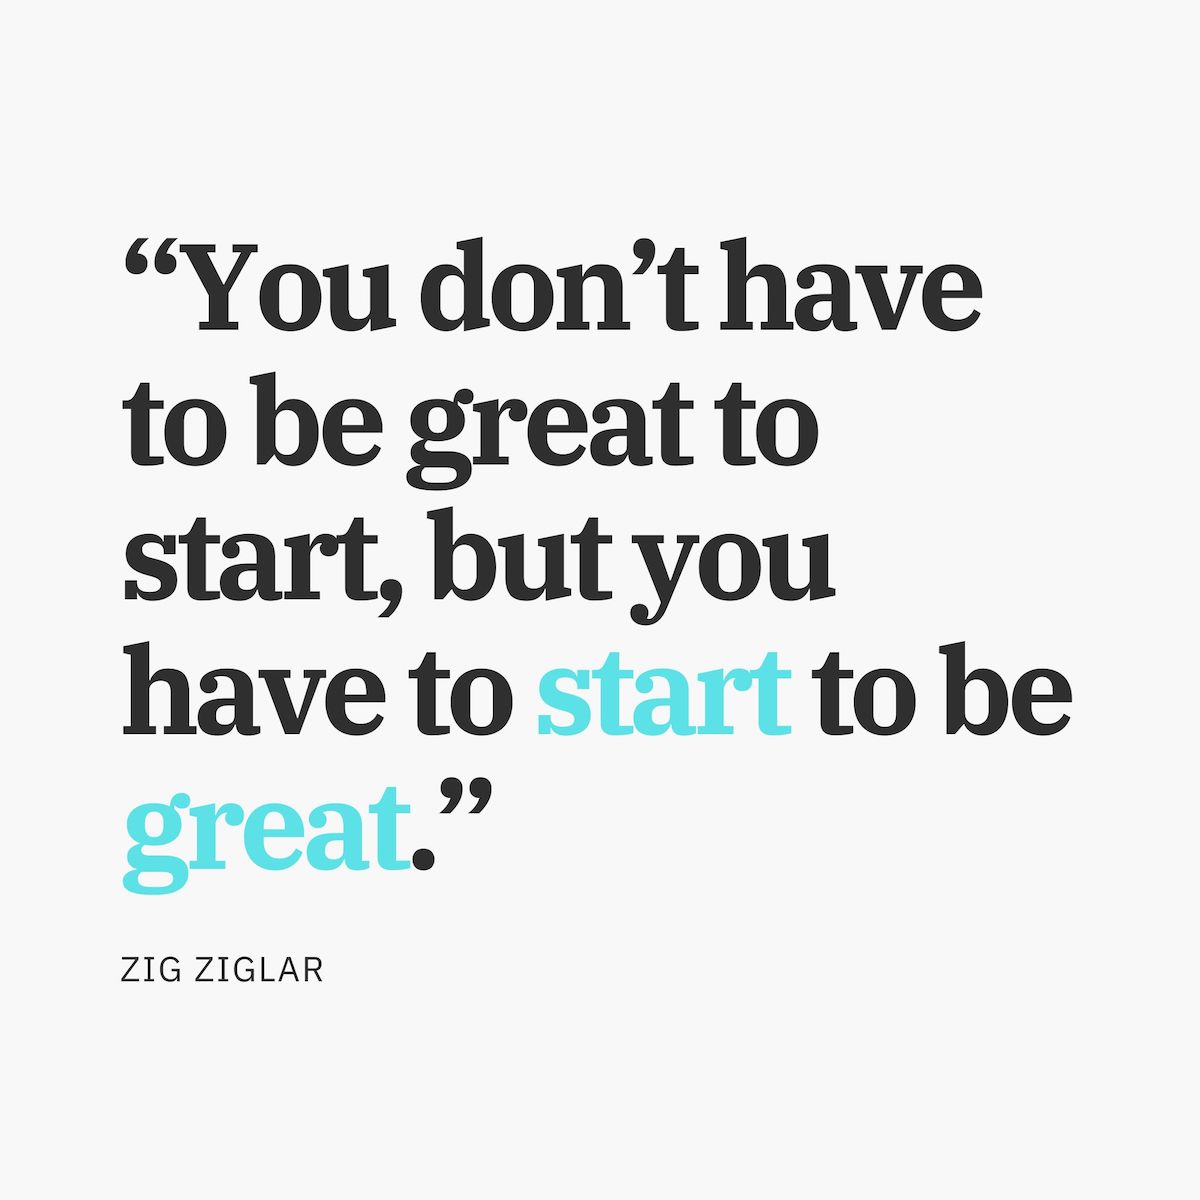 🚀 Don’t wait for perfection. Every step forward is progress.

Whether you’re a seasoned wholesale business or just starting, taking that first step towards embracing B2B eCommerce begins with that first click.

#FridayInspiration #ZigZiglar #B2BeCommerce